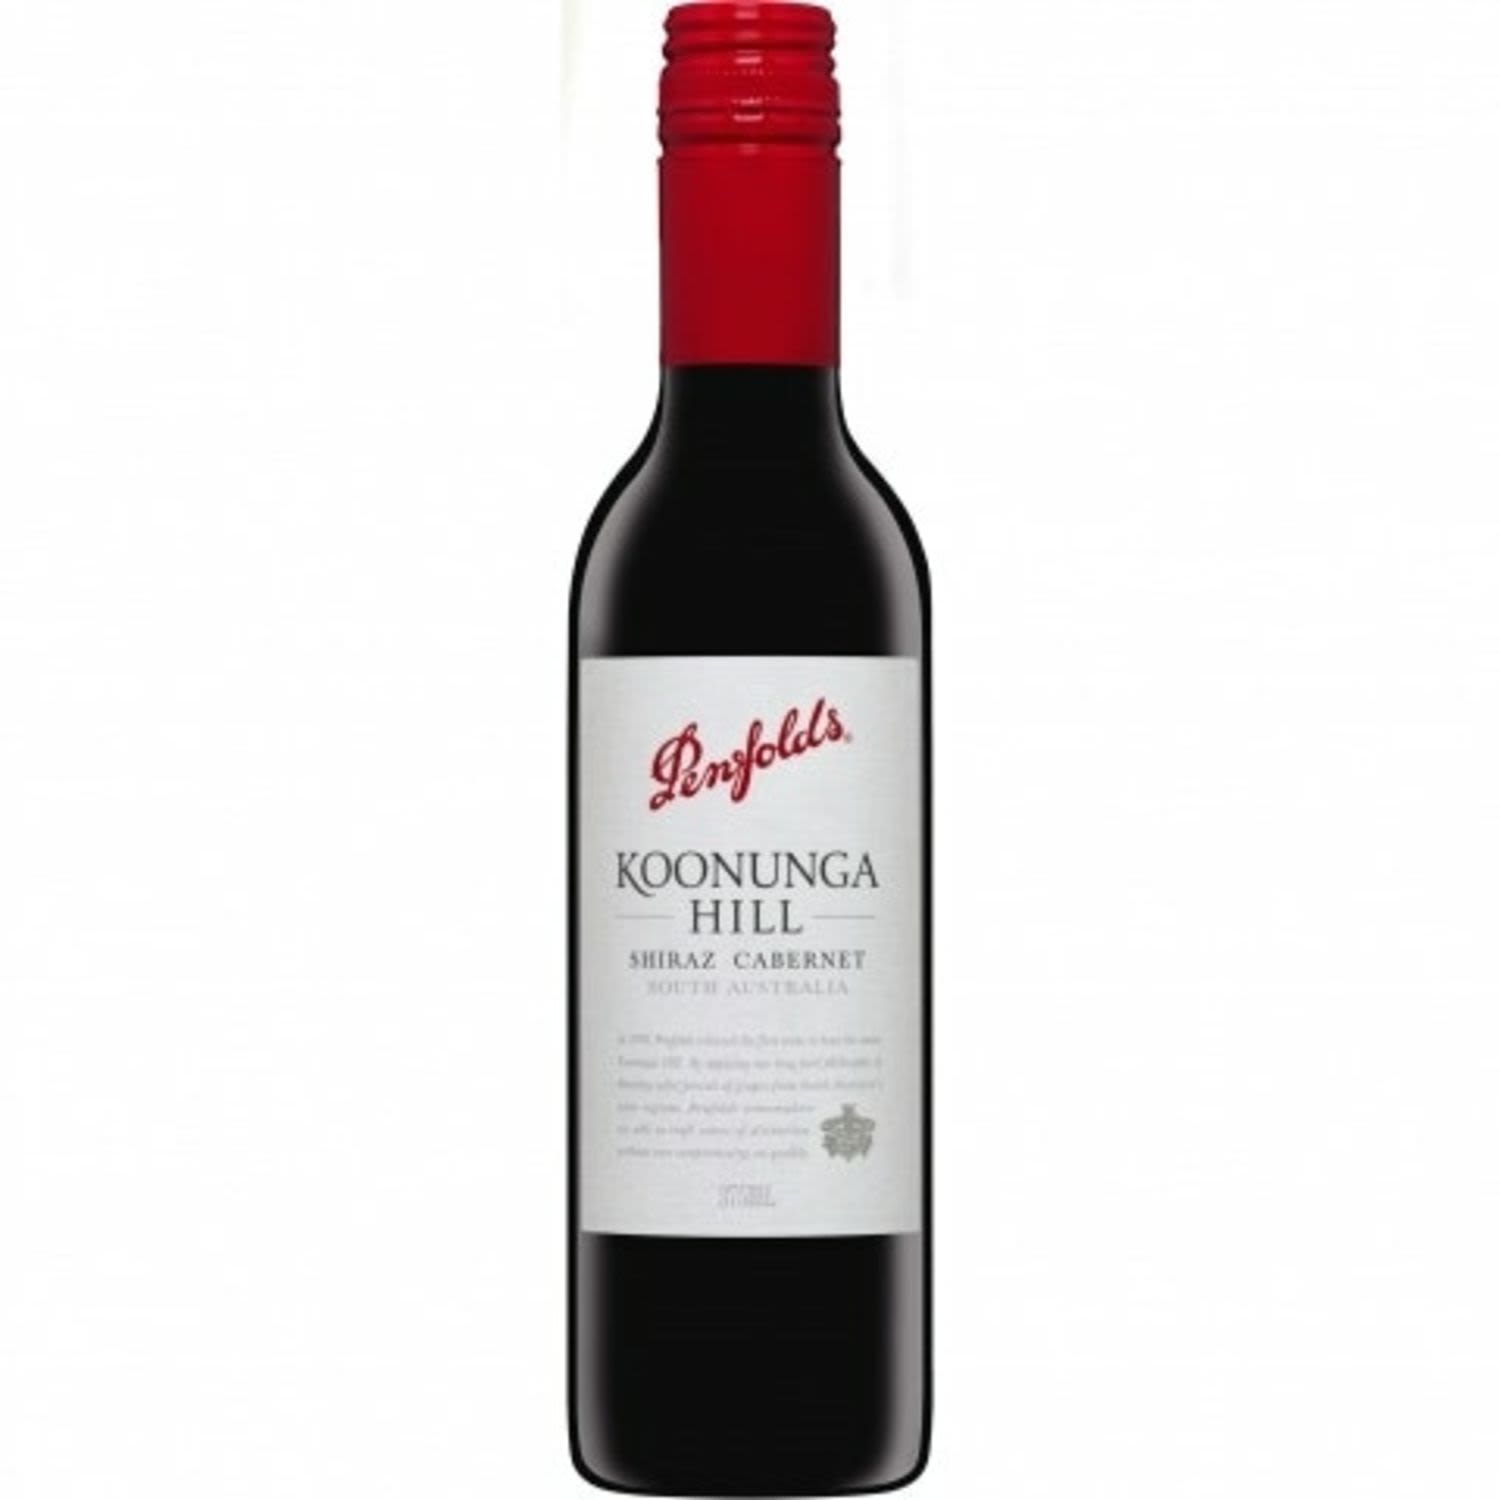 A quintessential Australian blend of Shiraz & Cabernet, offering generous palate weight defined structure respectively. Date, boysenberry & sweet cinnamon abound. Immediately accessible & a true reflection of the Penfolds winemaking style & philosophy.<br /> <br />Alcohol Volume: 14.50%<br /><br />Pack Format: Bottle<br /><br />Standard Drinks: 4.3</br /><br />Pack Type: Bottle<br /><br />Country of Origin: Australia<br /><br />Region: Koonunga Hill<br /><br />Vintage: Various<br />